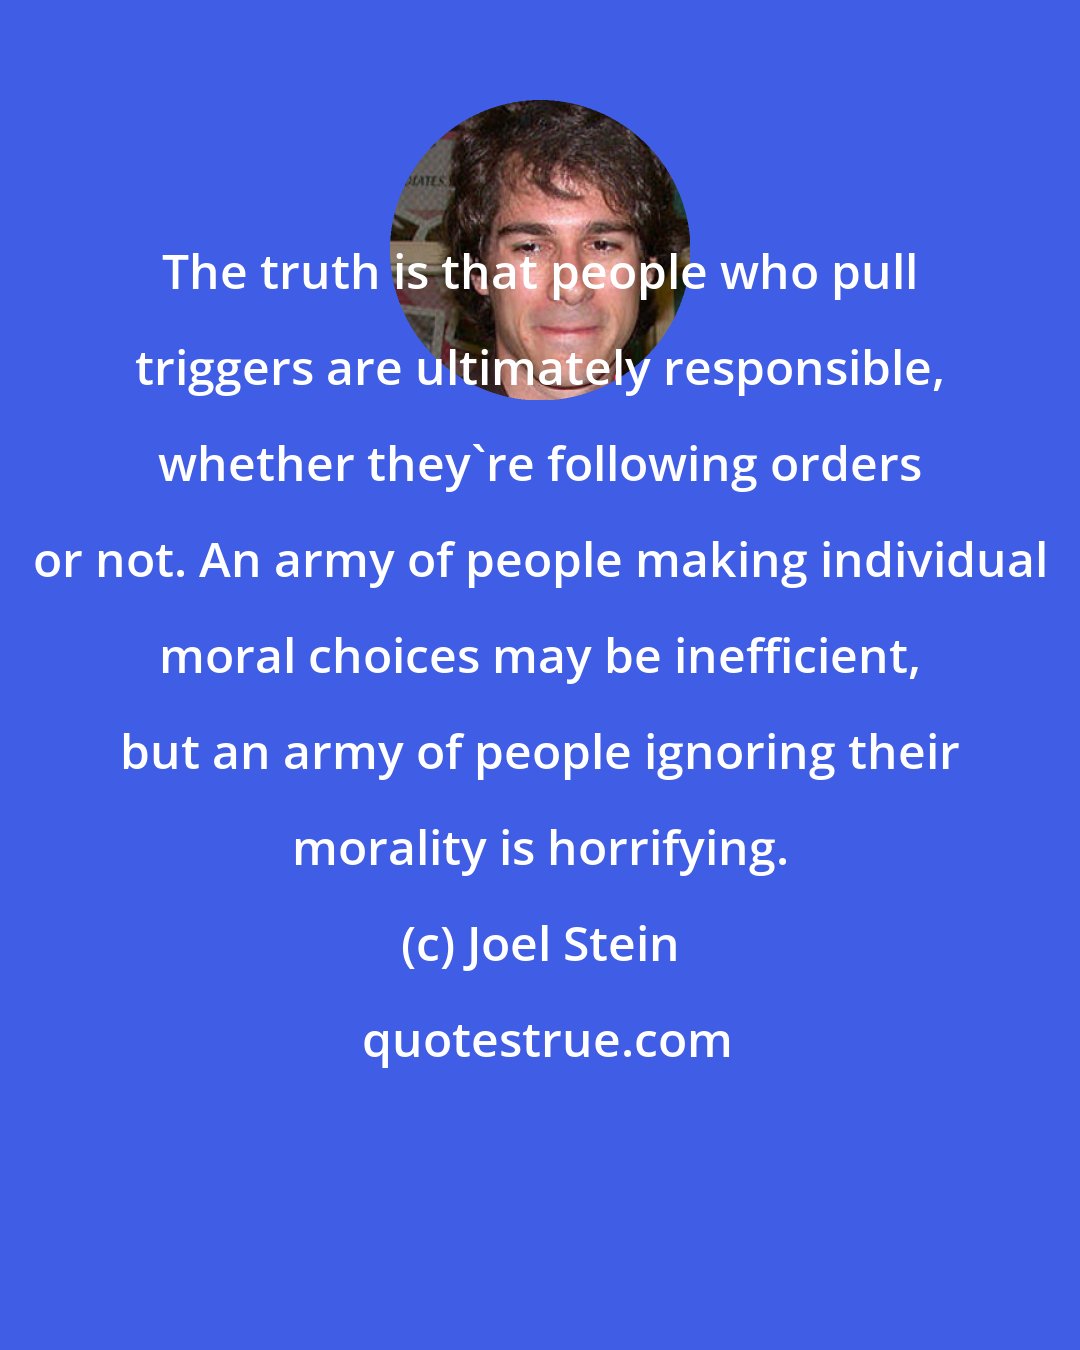 Joel Stein: The truth is that people who pull triggers are ultimately responsible, whether they're following orders or not. An army of people making individual moral choices may be inefficient, but an army of people ignoring their morality is horrifying.